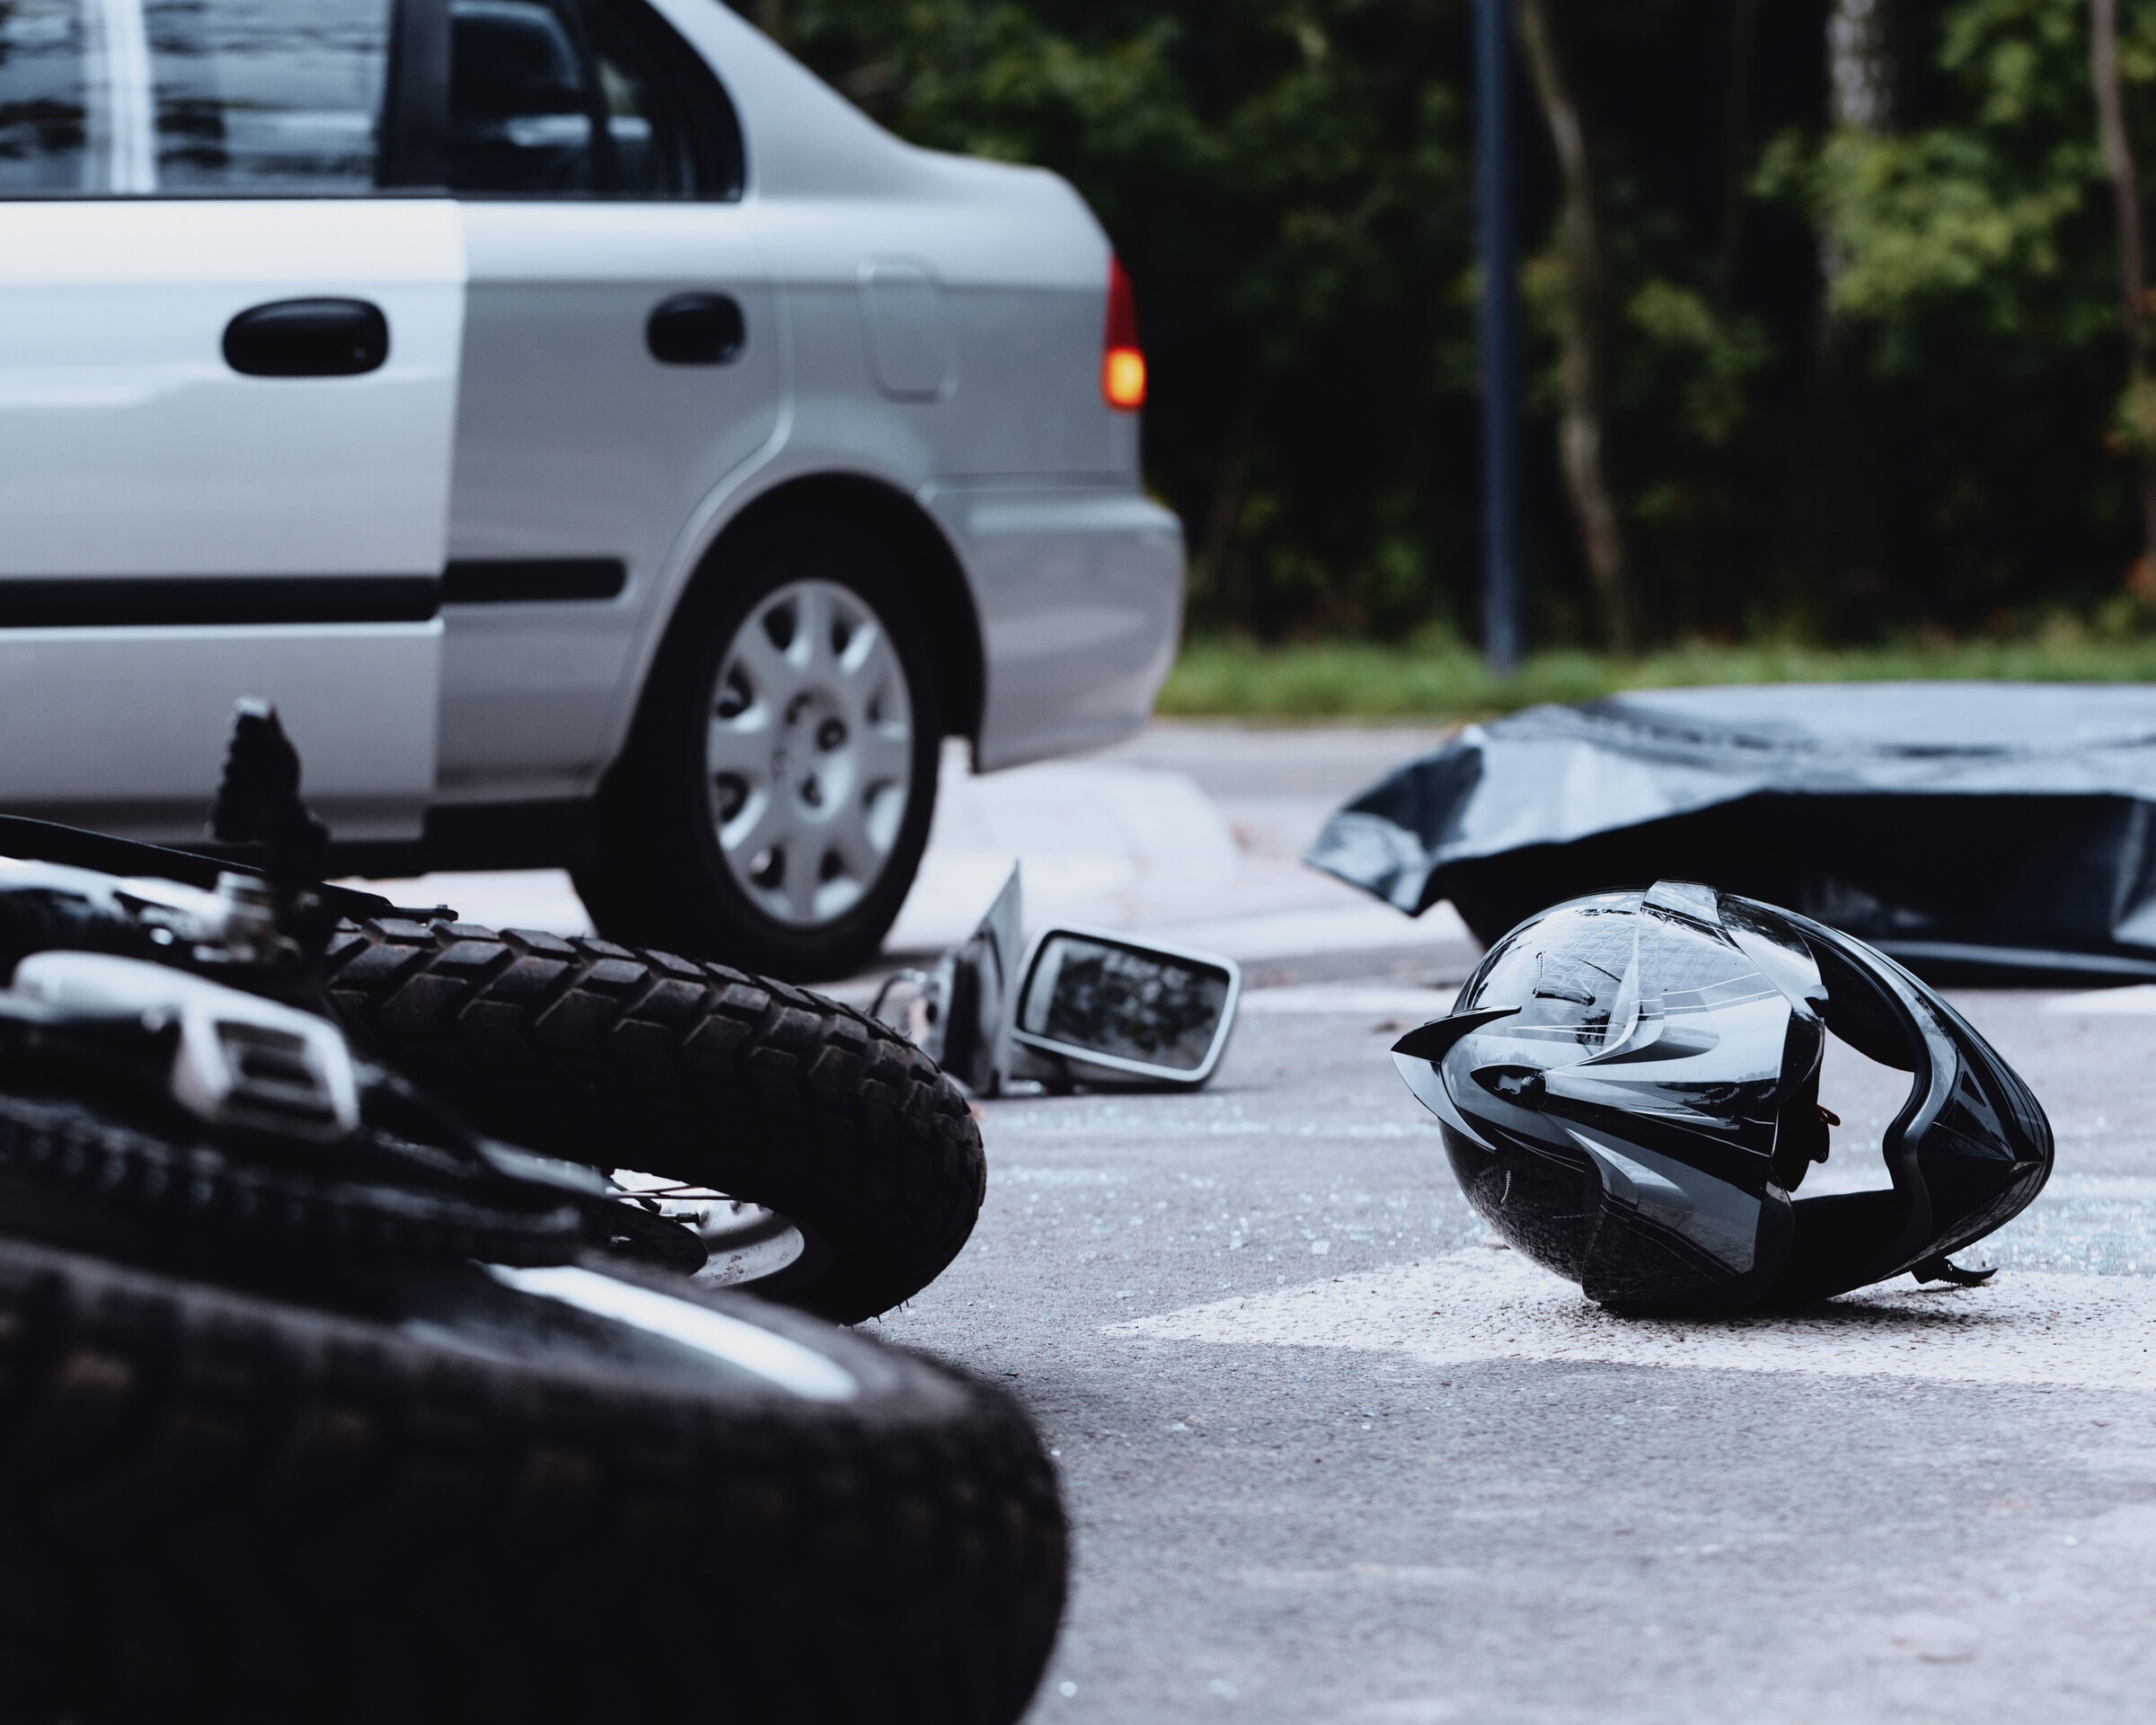 Reliable lawyers who are dedicated to providing support and guidance to those affected by car and motor vehicle accidents in Beaumont